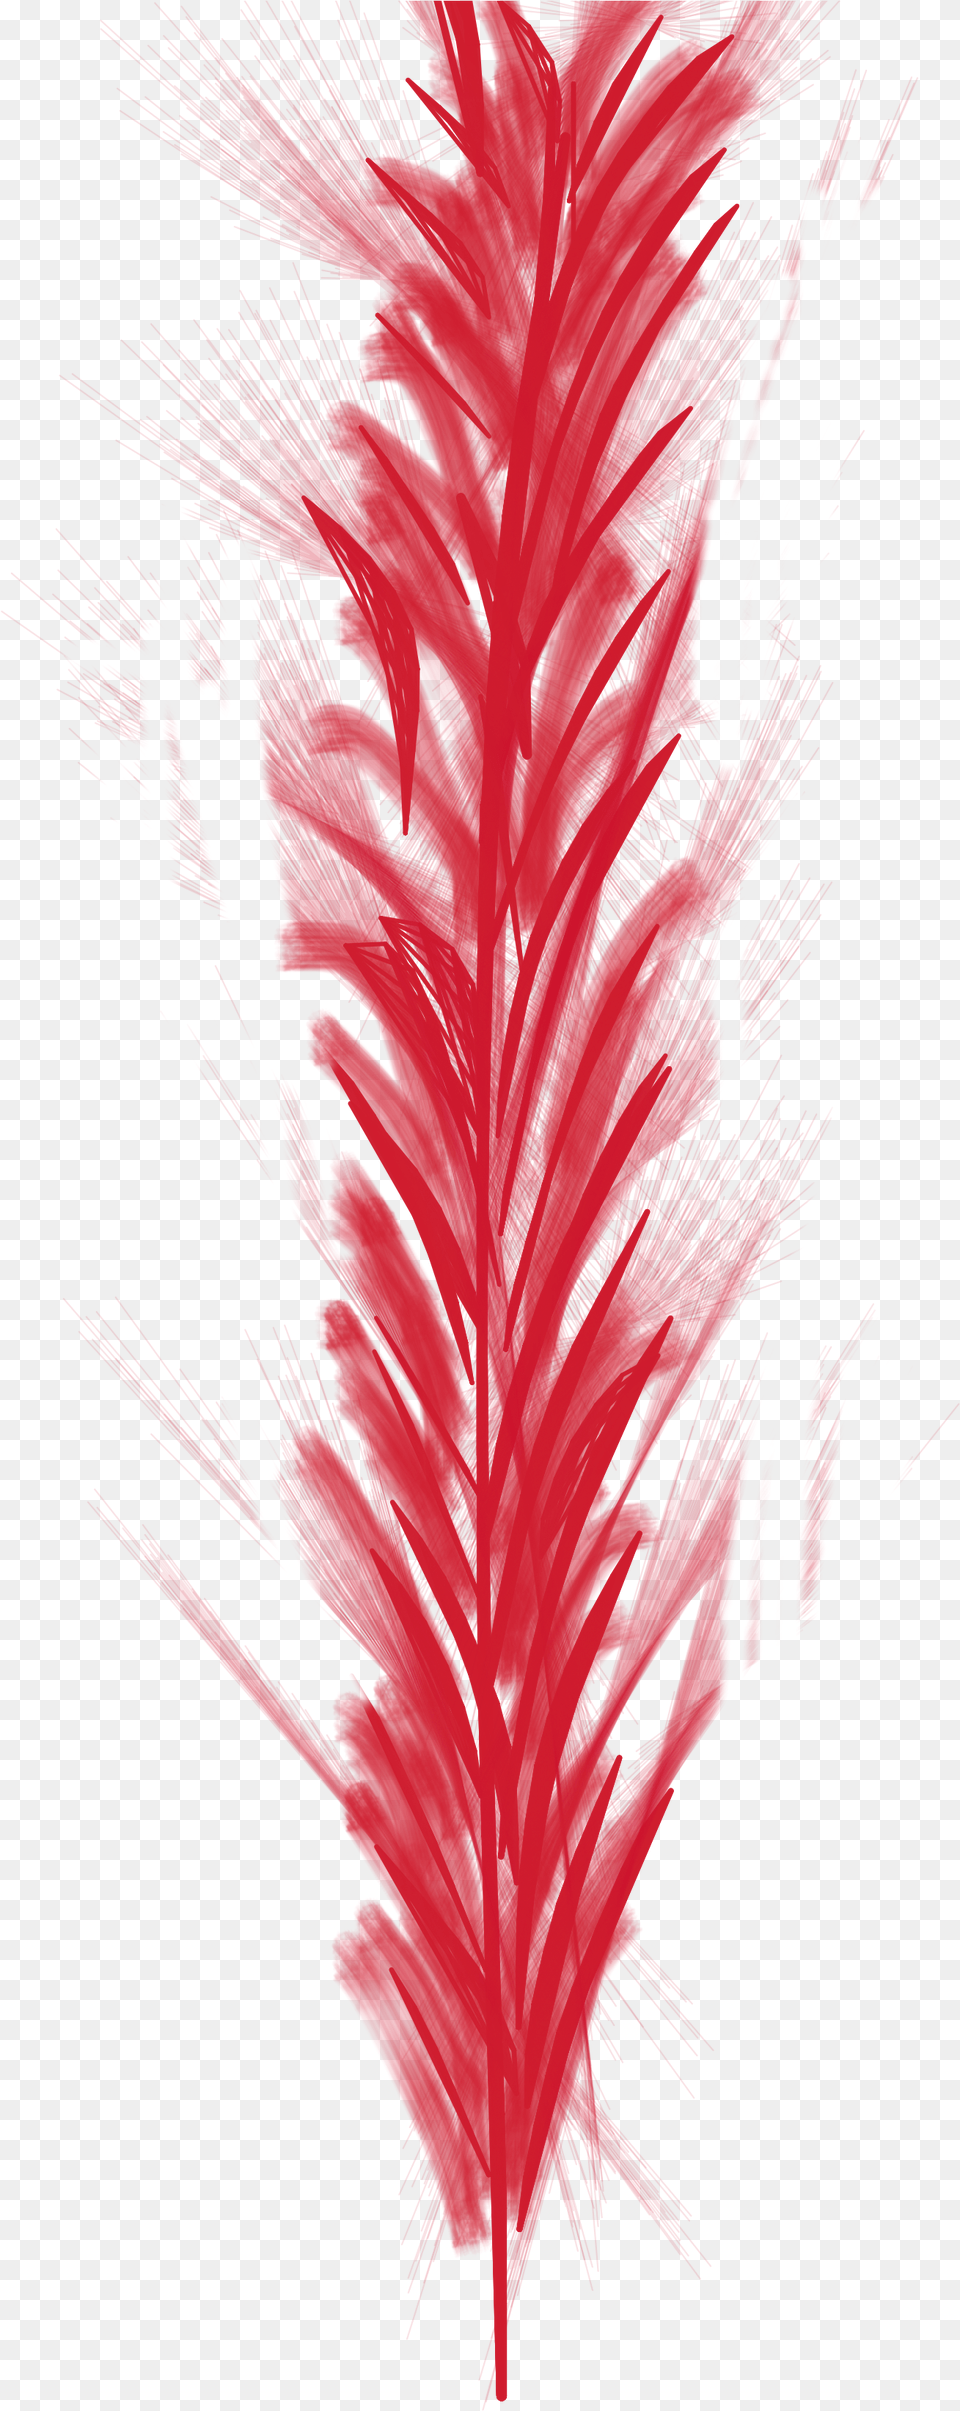 Red Feather Bird Fly Fluff Pillow Feathered, Accessories, Art, Graphics, Adult Free Png Download